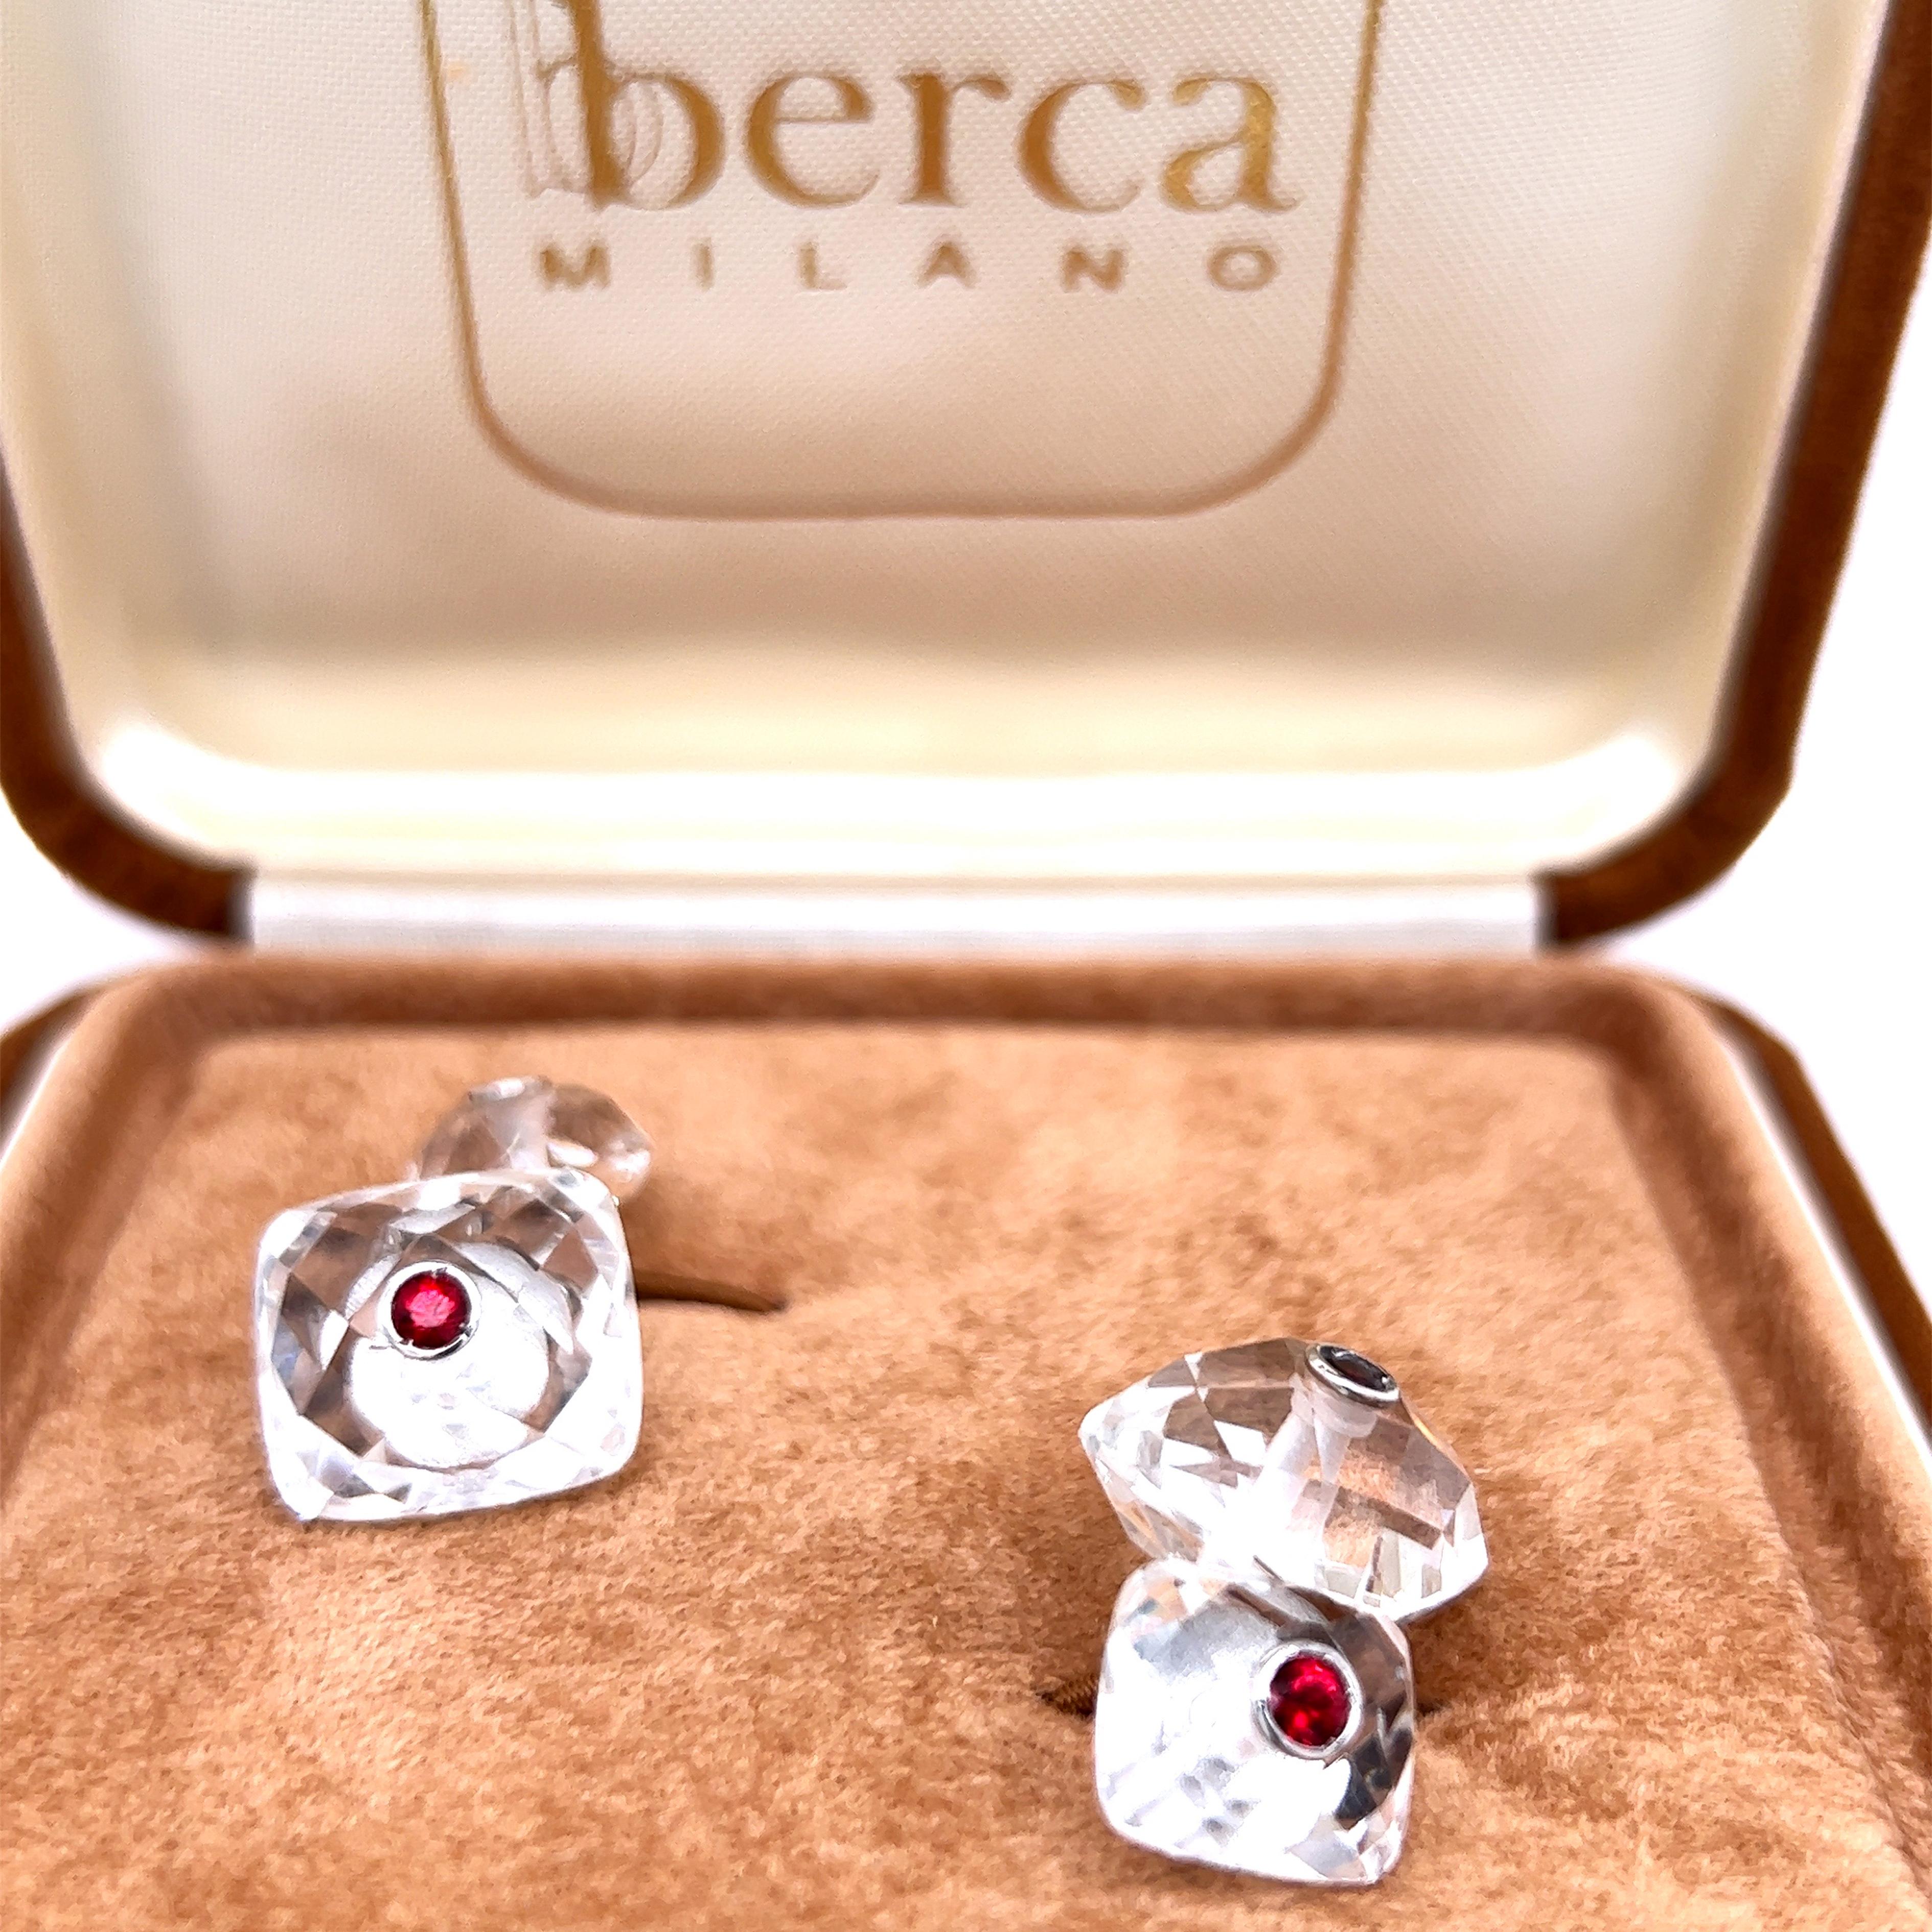 Berca Ruby Inlaid Faceted Rock Crystal Quartz Setting White Gold Cufflinks For Sale 4